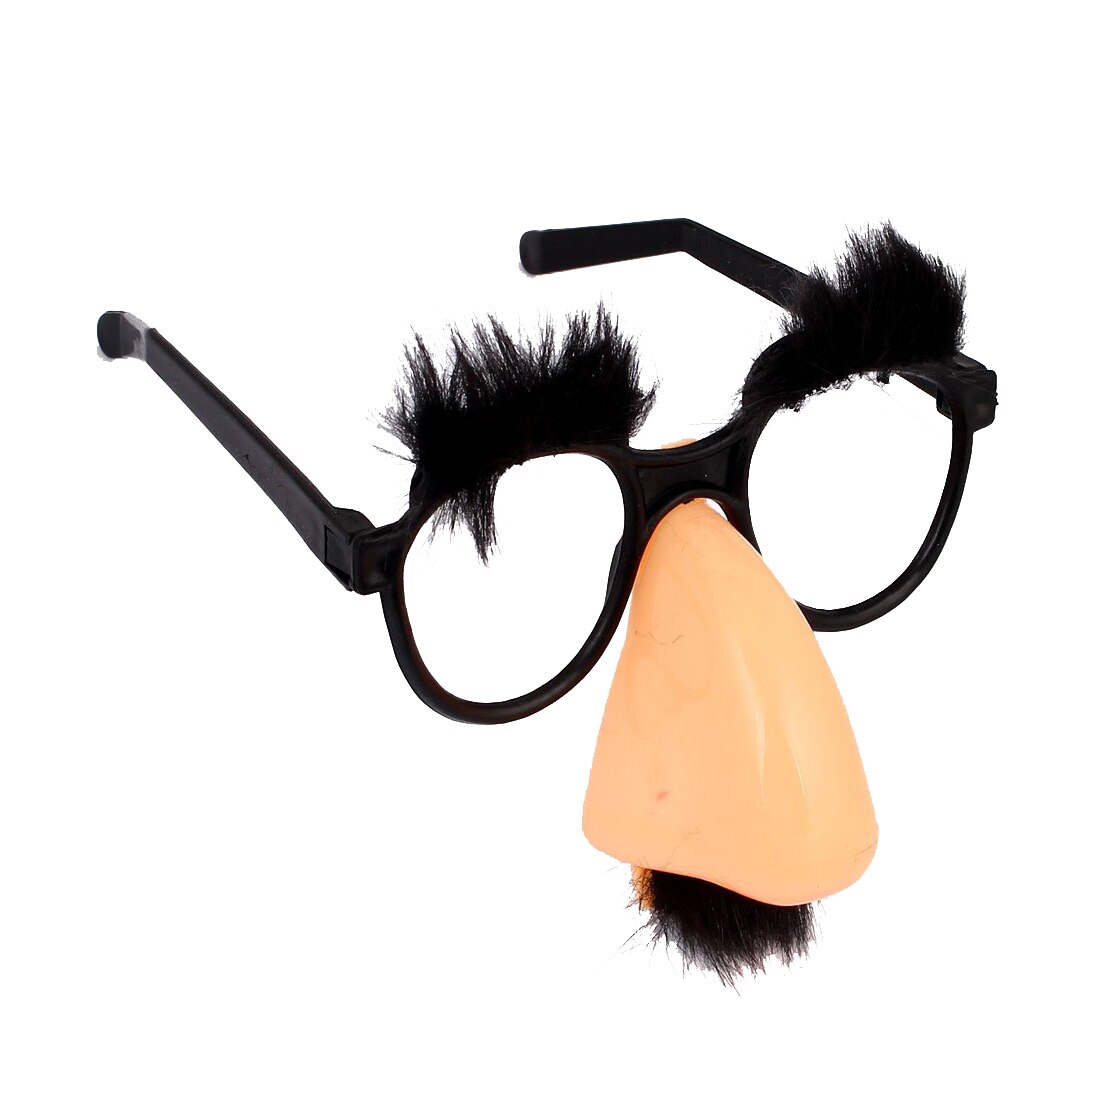 Coral Clown Pink Nose and Black Mustache Round Glasses